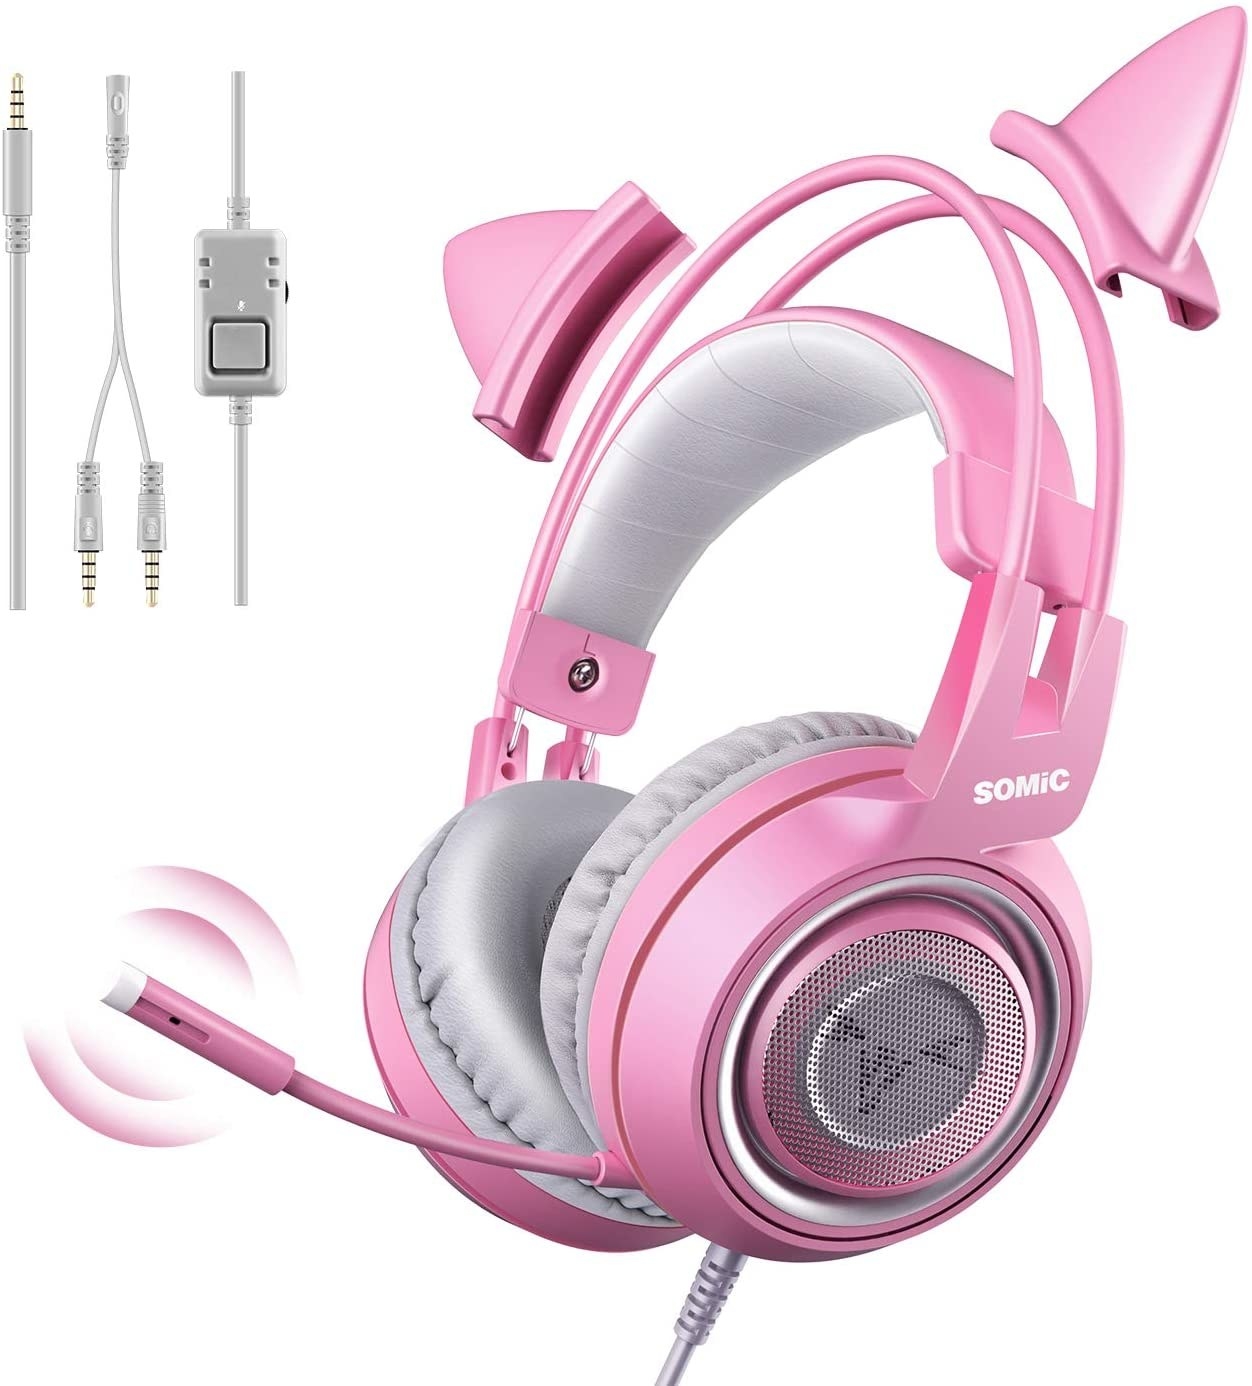 the pink cat ear headset